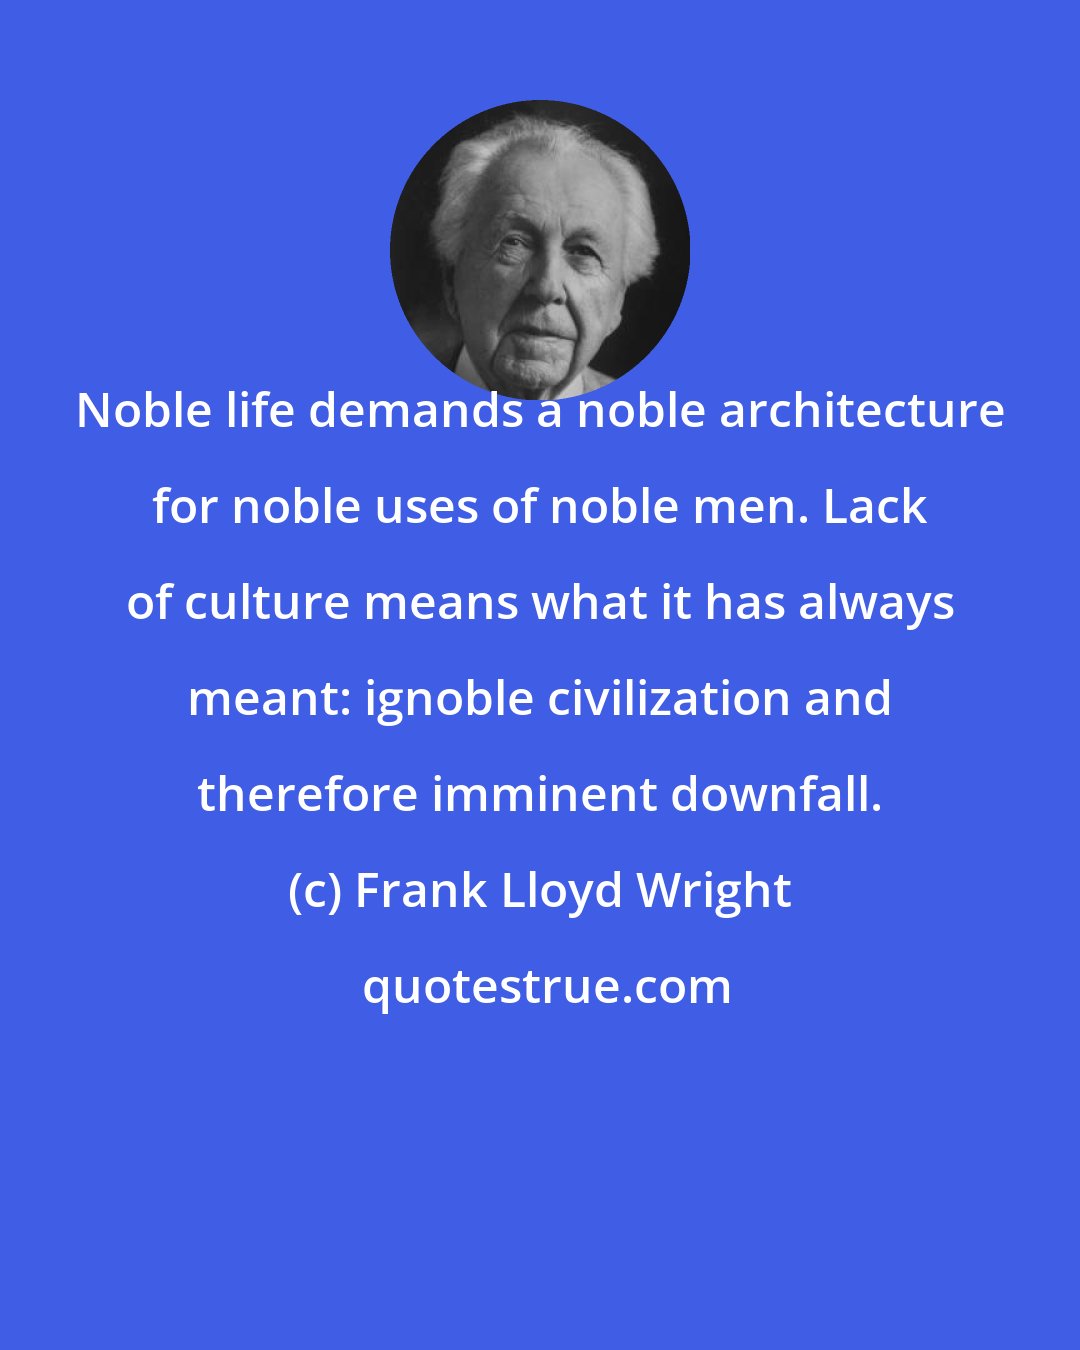 Frank Lloyd Wright: Noble life demands a noble architecture for noble uses of noble men. Lack of culture means what it has always meant: ignoble civilization and therefore imminent downfall.